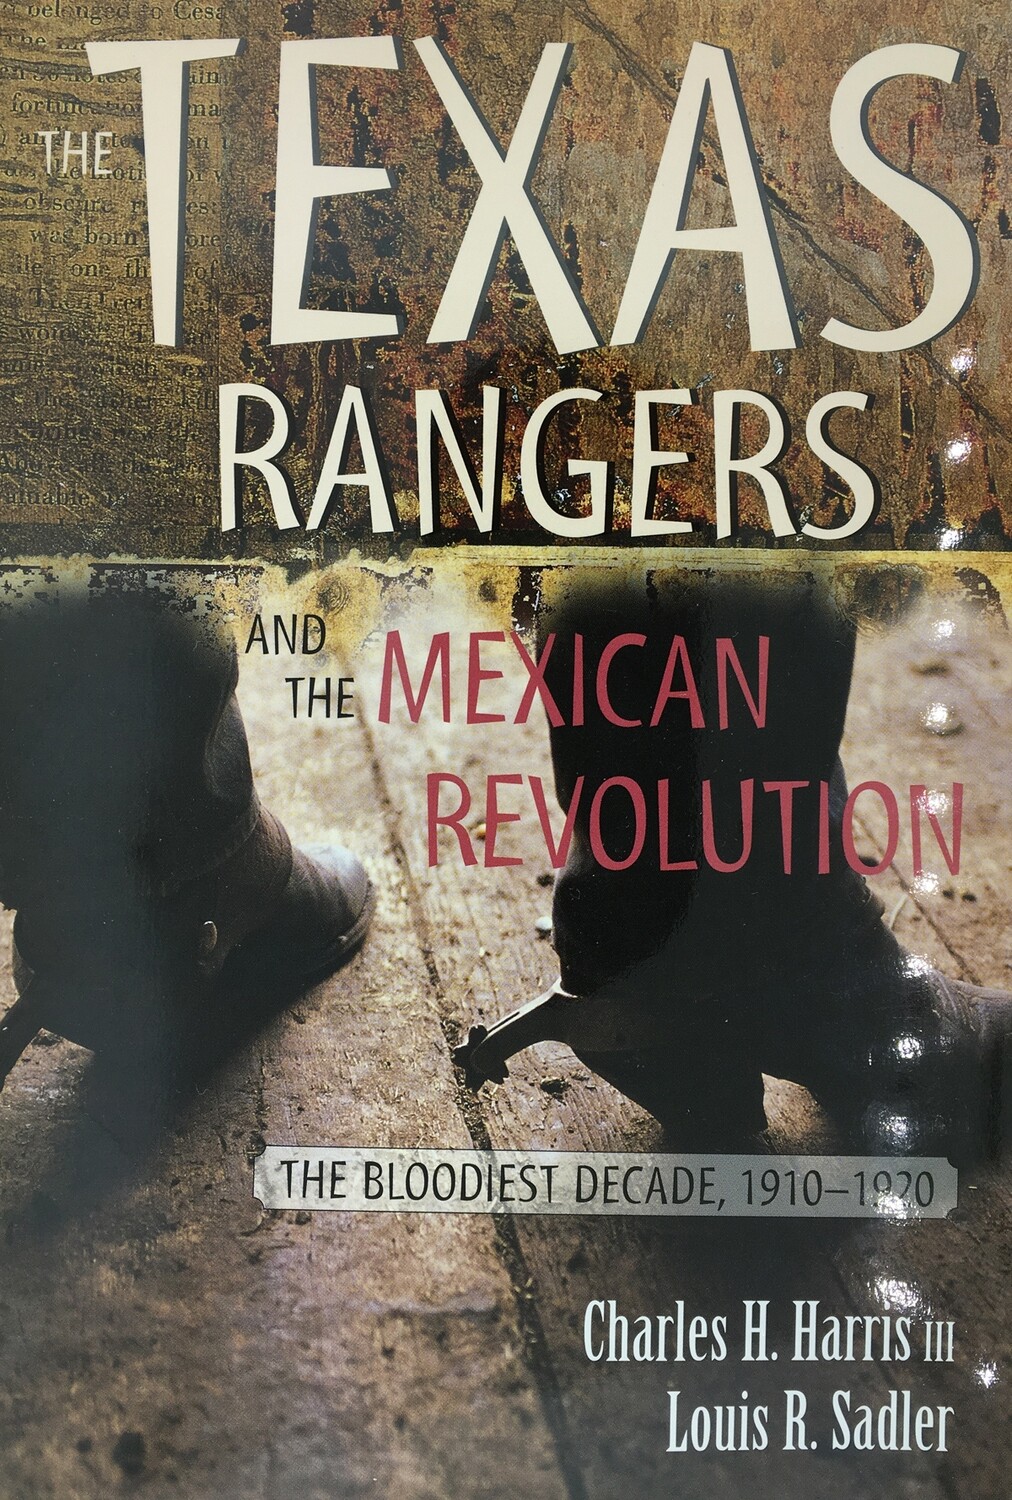 The Texas Rangers & the Mexican Revolution